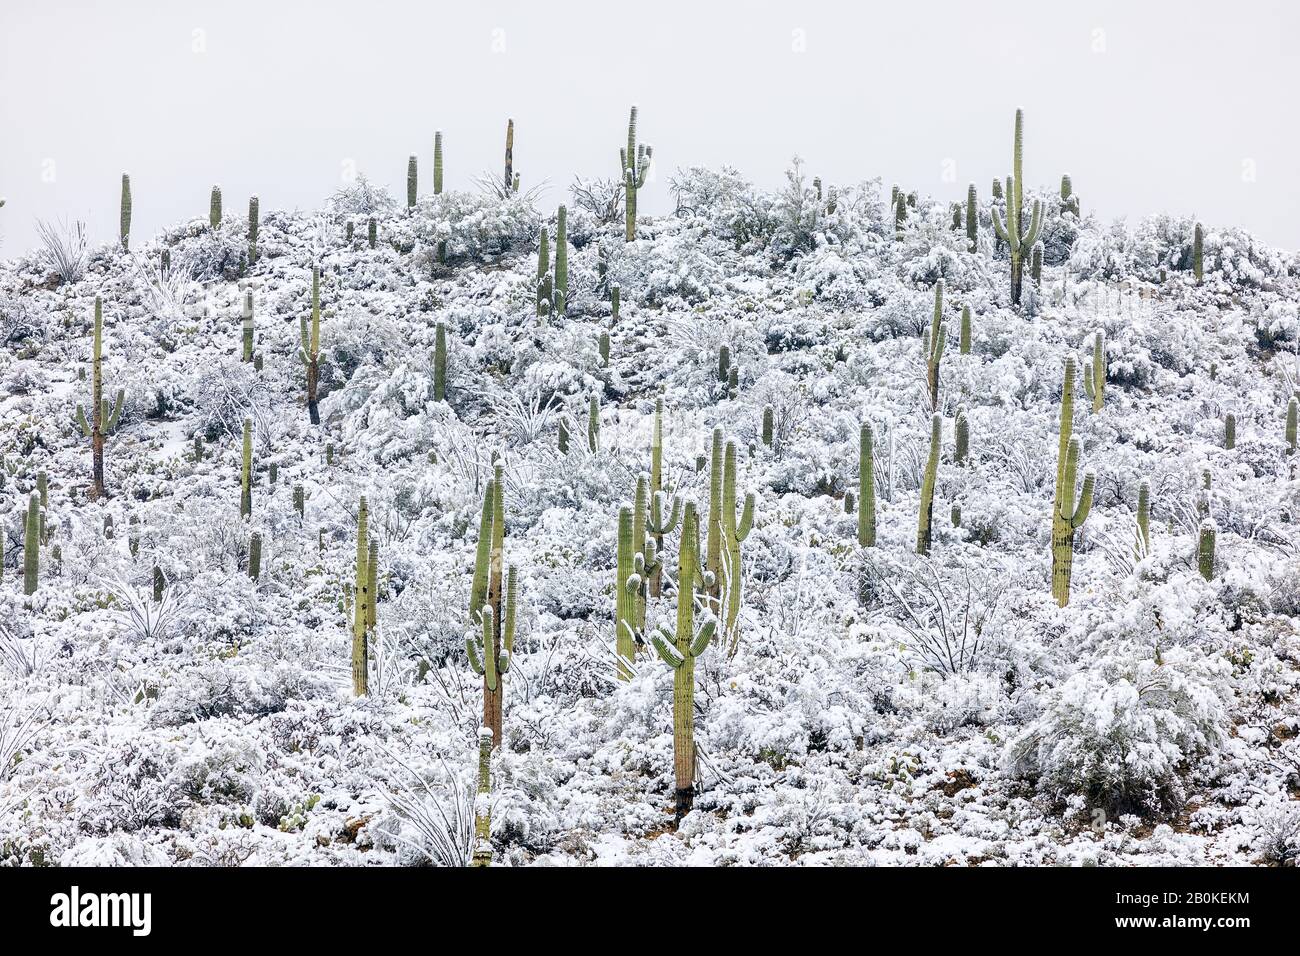 A winter storm covers Saguaro cactus in snow at Saguaro National Park East in Tucson, Arizona Stock Photo